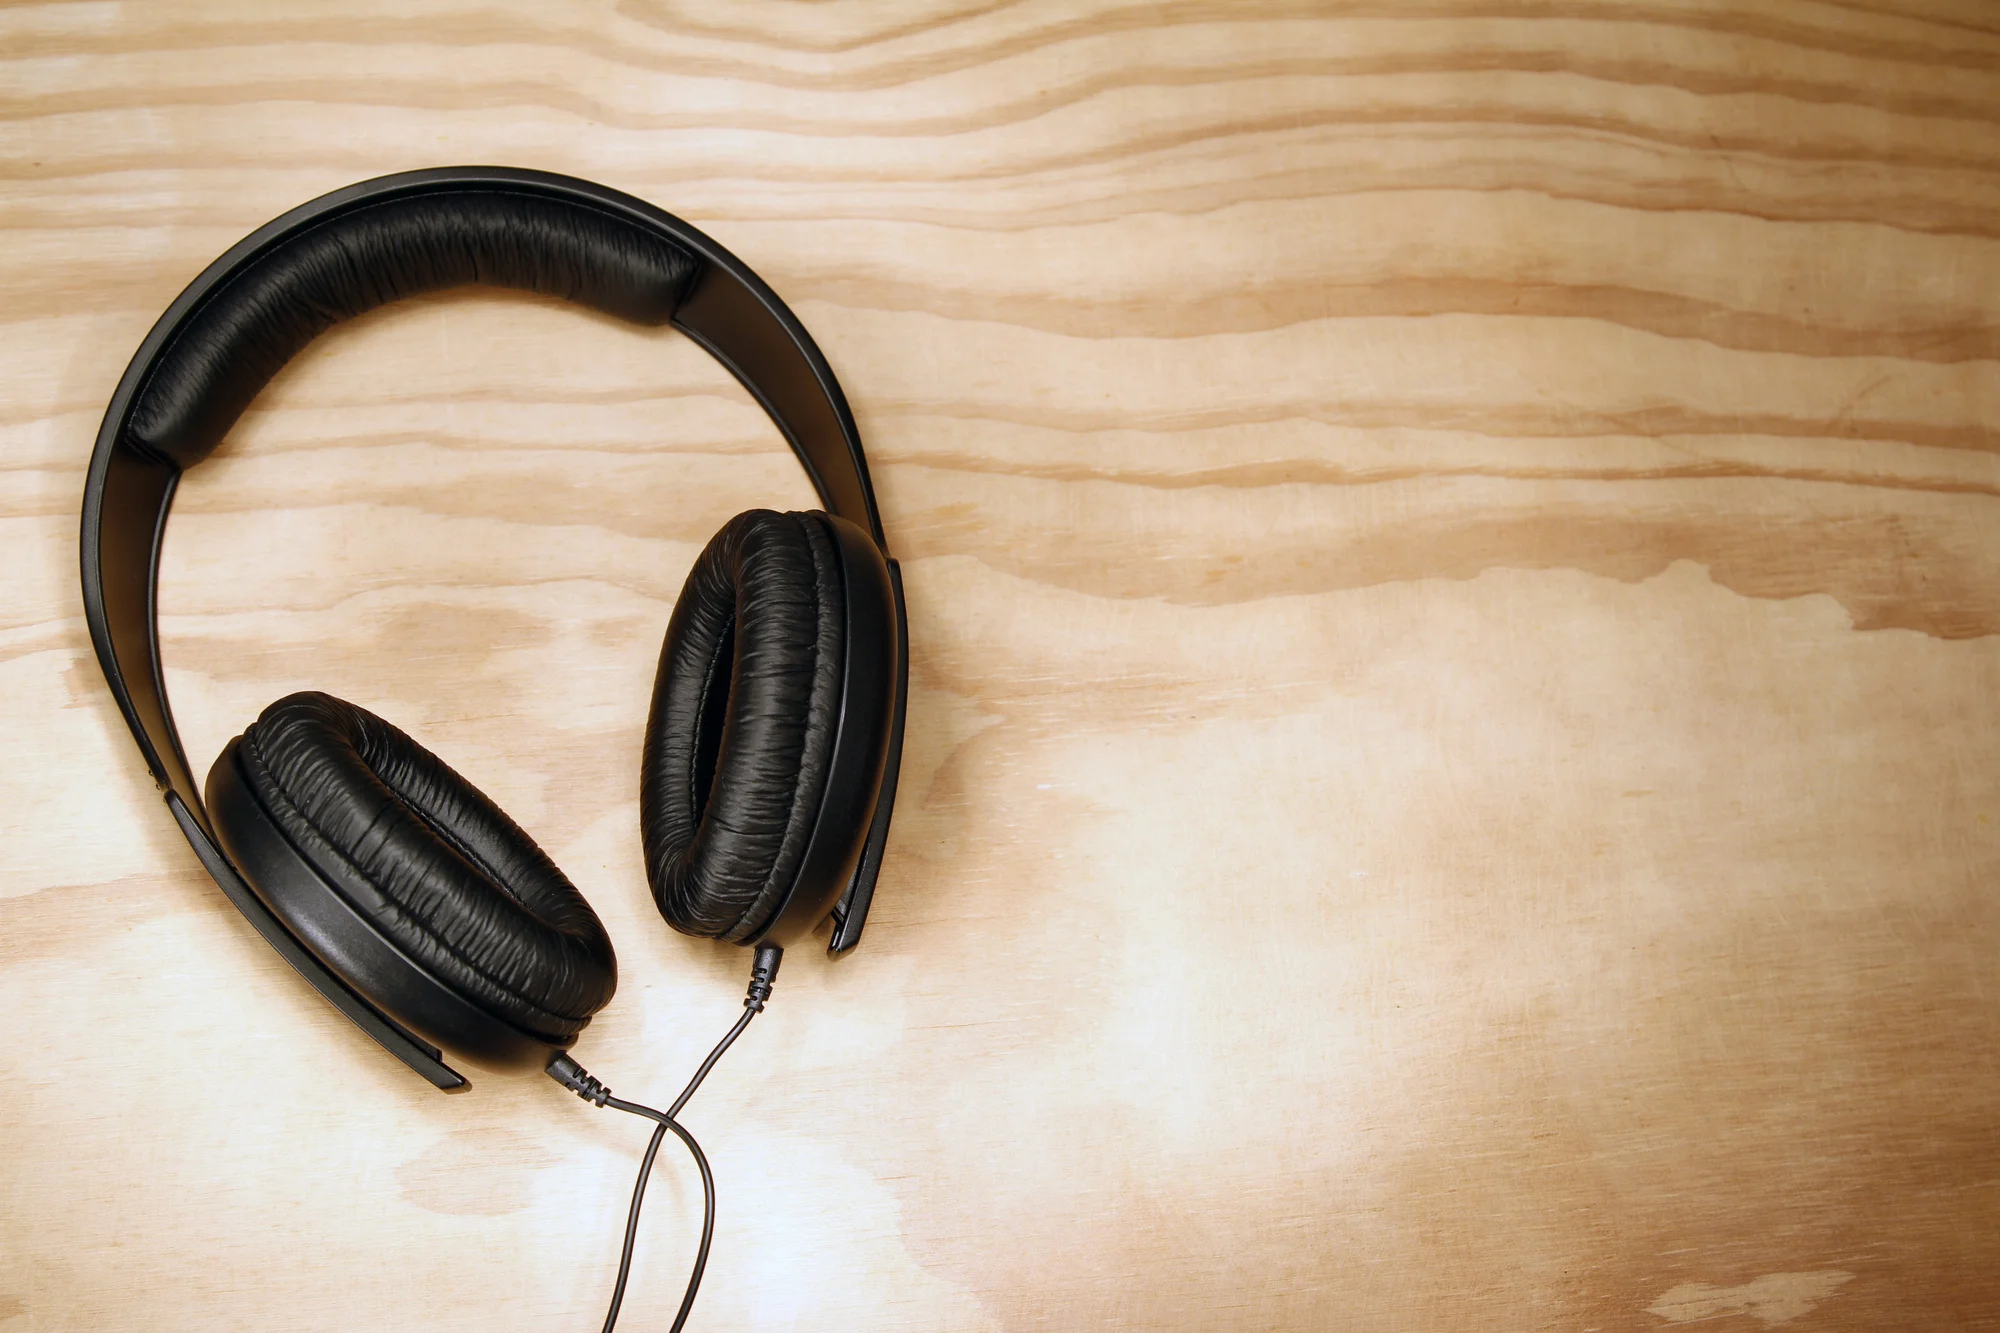 MP3 vs Wav Quality: What Are the Differences?